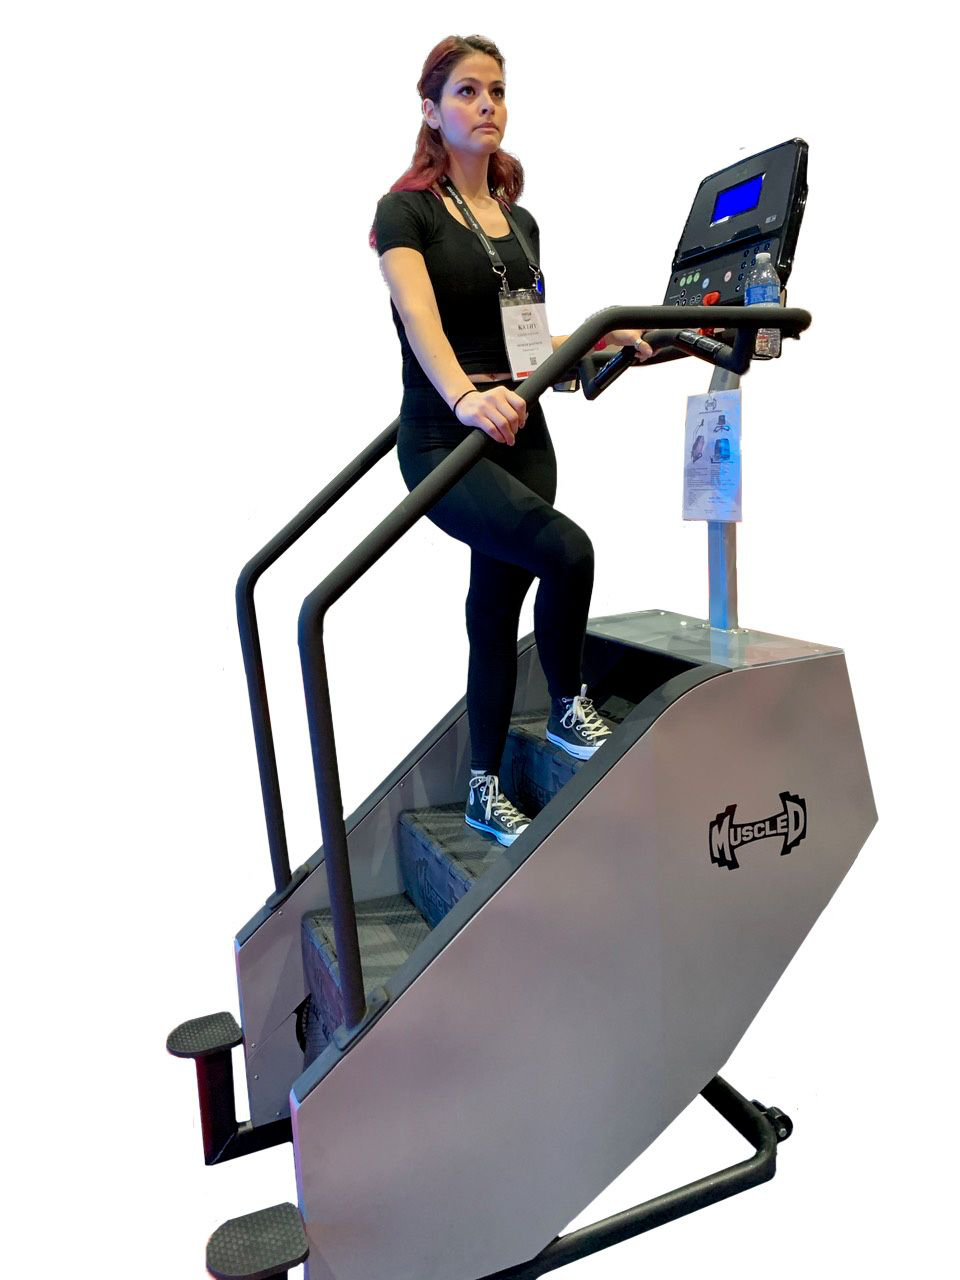 Muscle Stepper Commercial Stair Climber - Muscle D